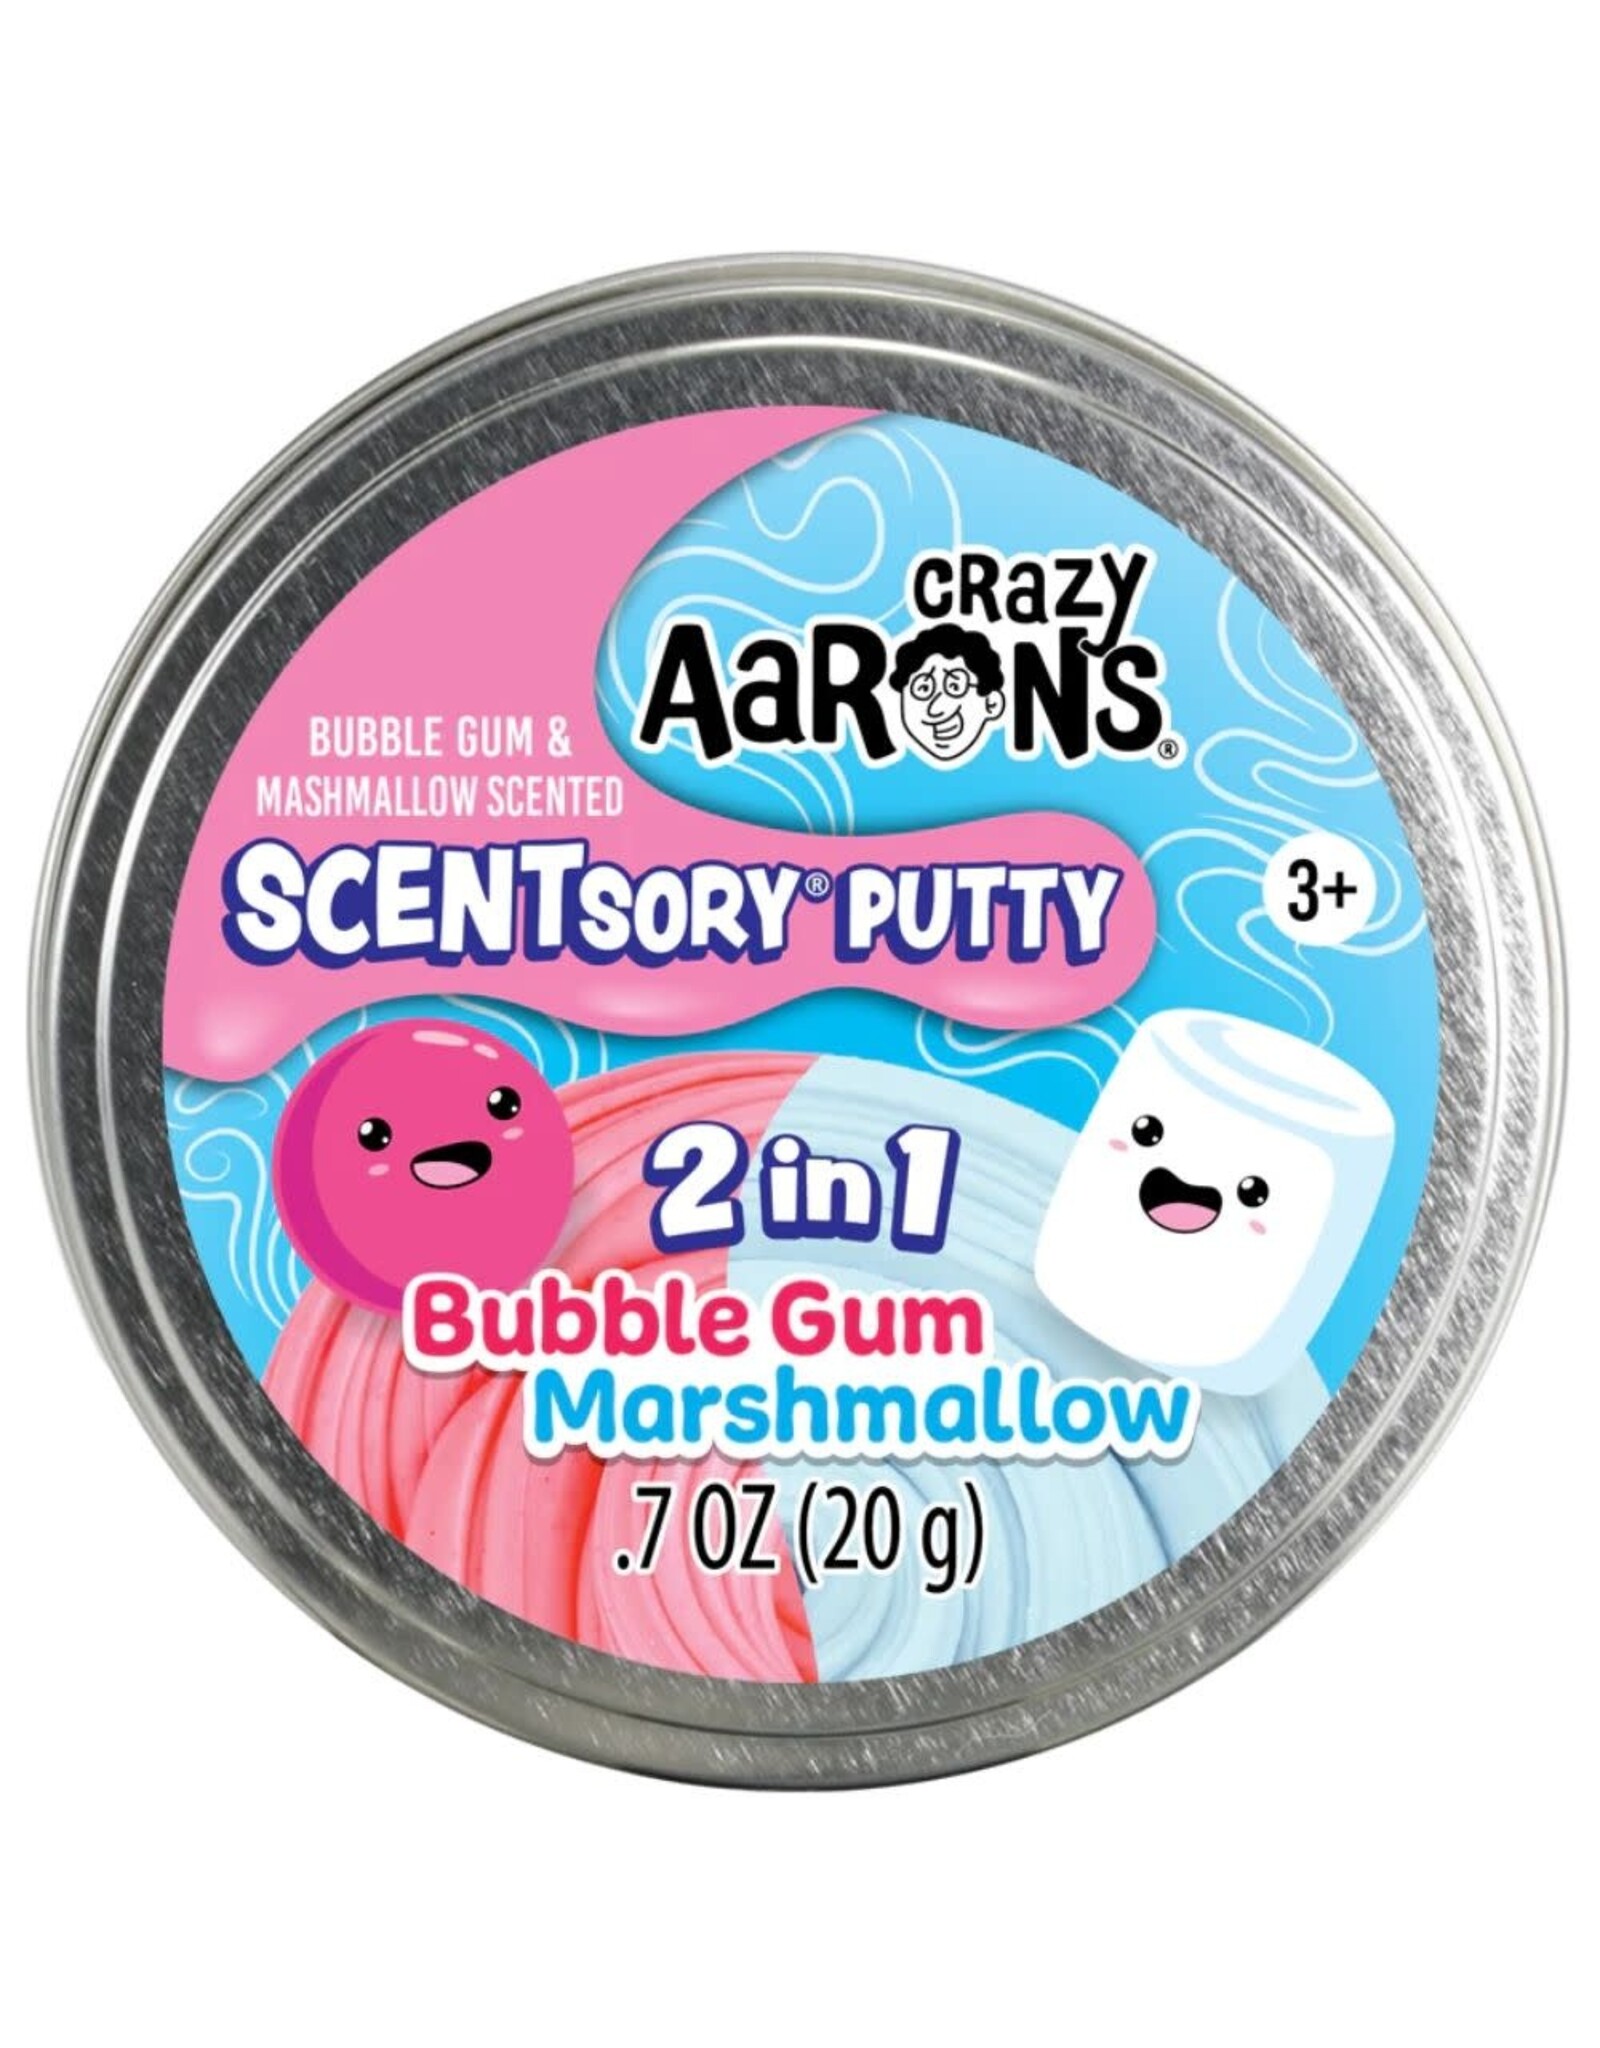 Crazy Aaron's Crazy Aaron's SCENTsory Putty Duo - Bubble Gum & Marshmallow